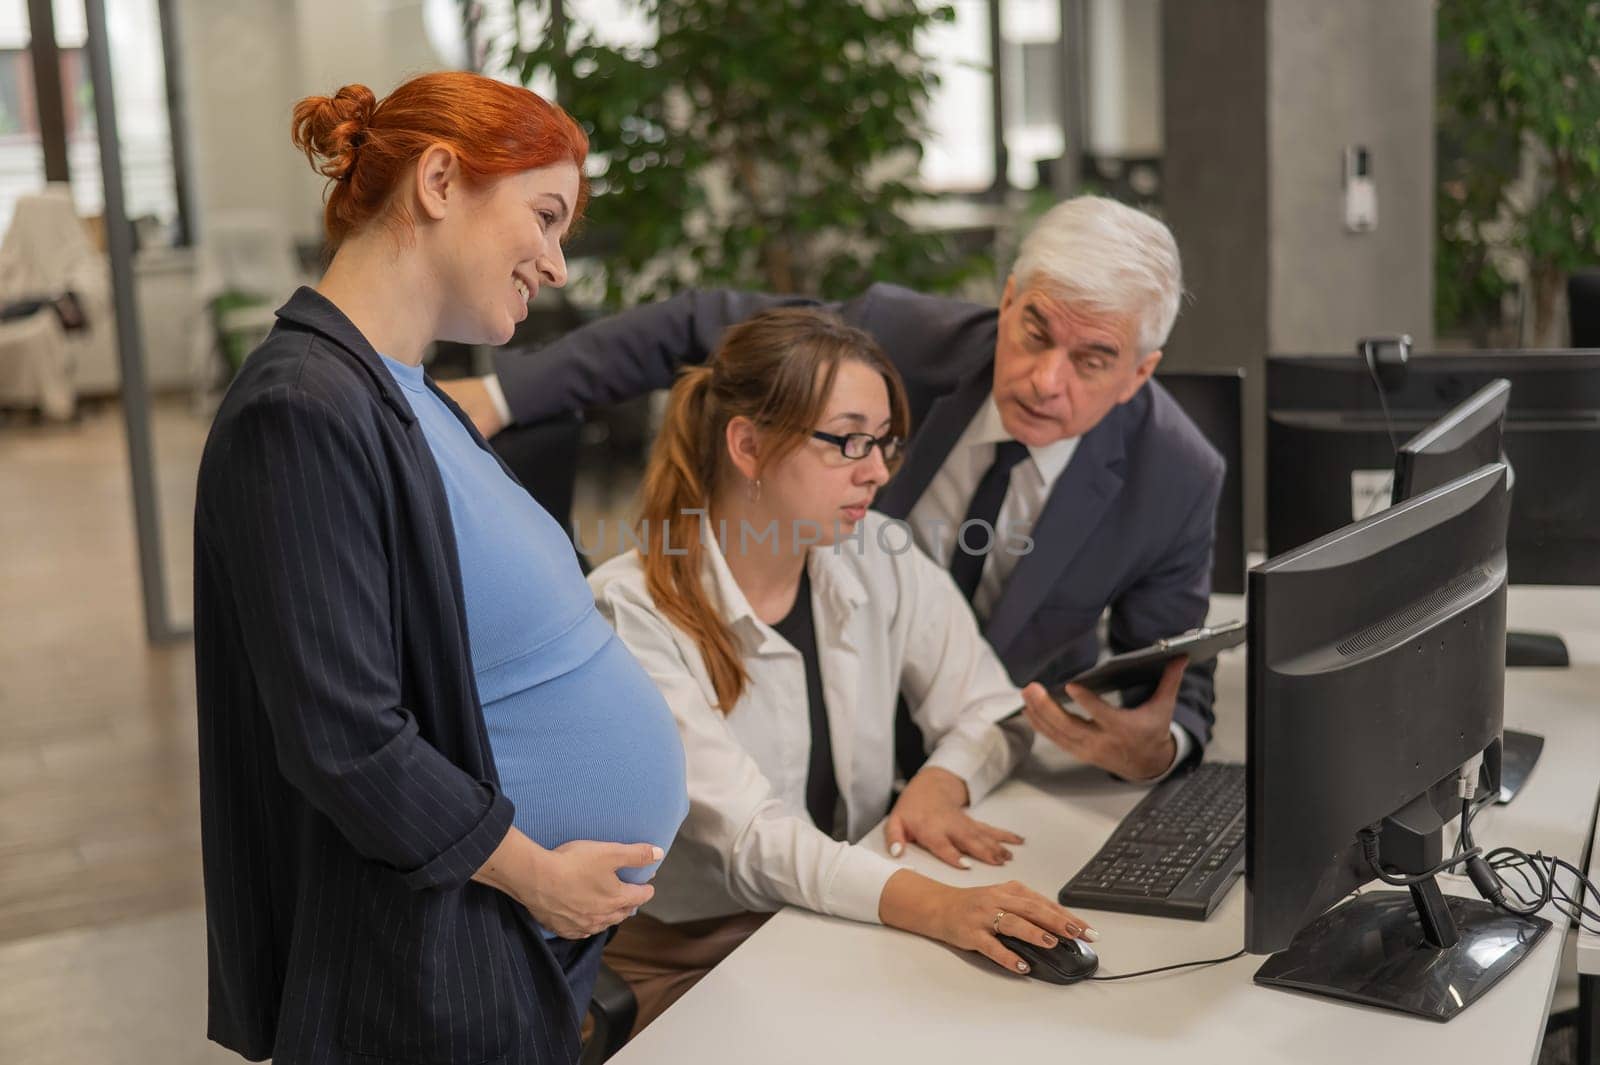 An elderly man, a Caucasian woman and a pregnant woman are discussing work issues at the computer